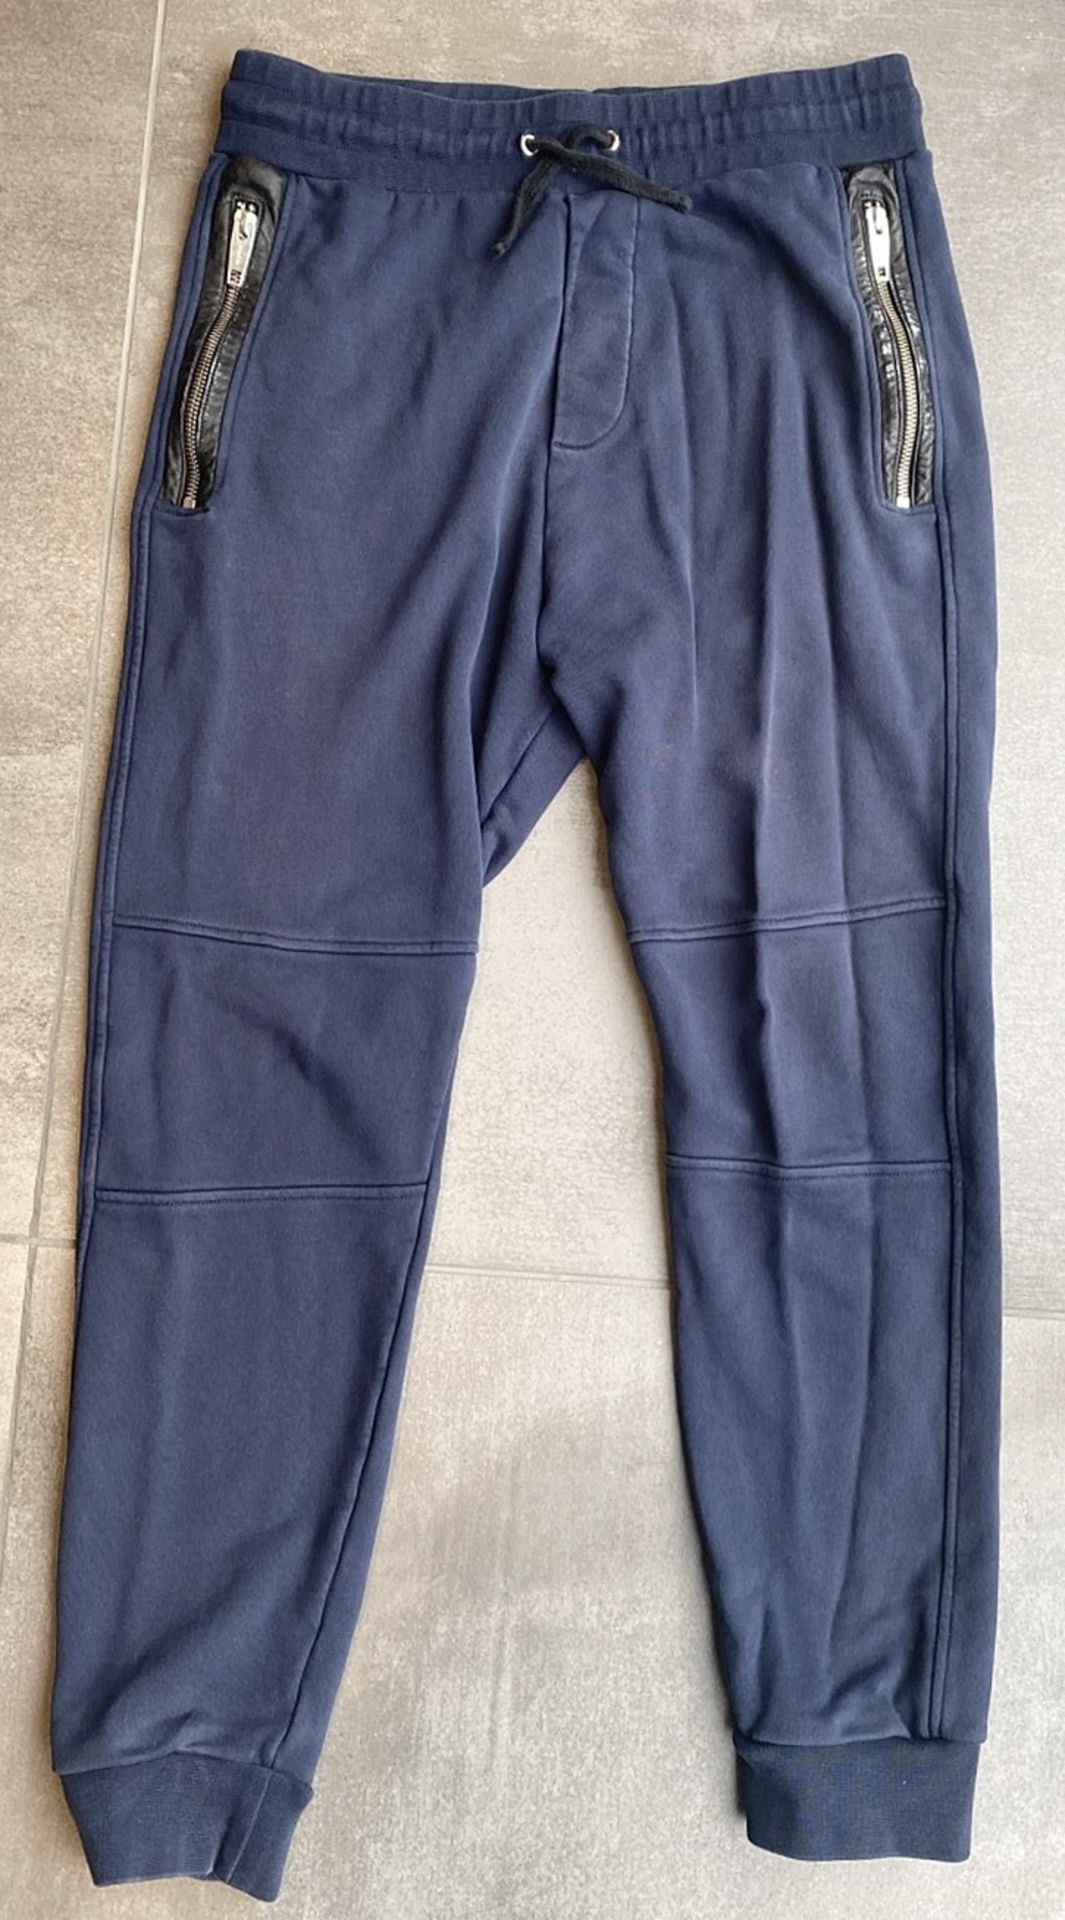 1 x Men's Genuine The Kooples Tracksuit In Navy - Size: Medium - Preowned In Worn - Image 9 of 12